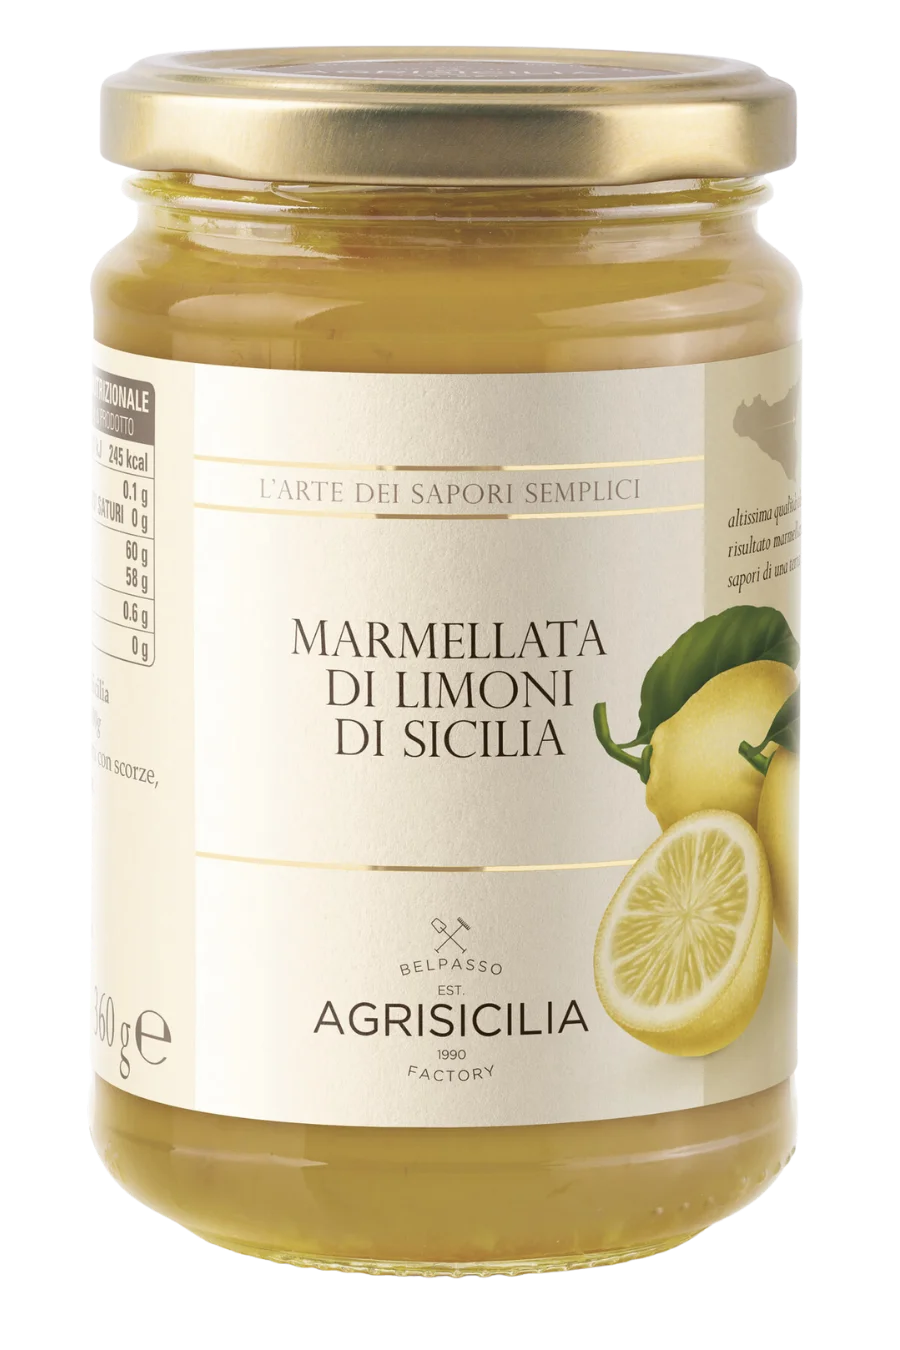 The marmalade is made from high quality lemons, grown and harvested by hand in Sicily, and is a product of Sicilian excellence with an unmistakable freshness.